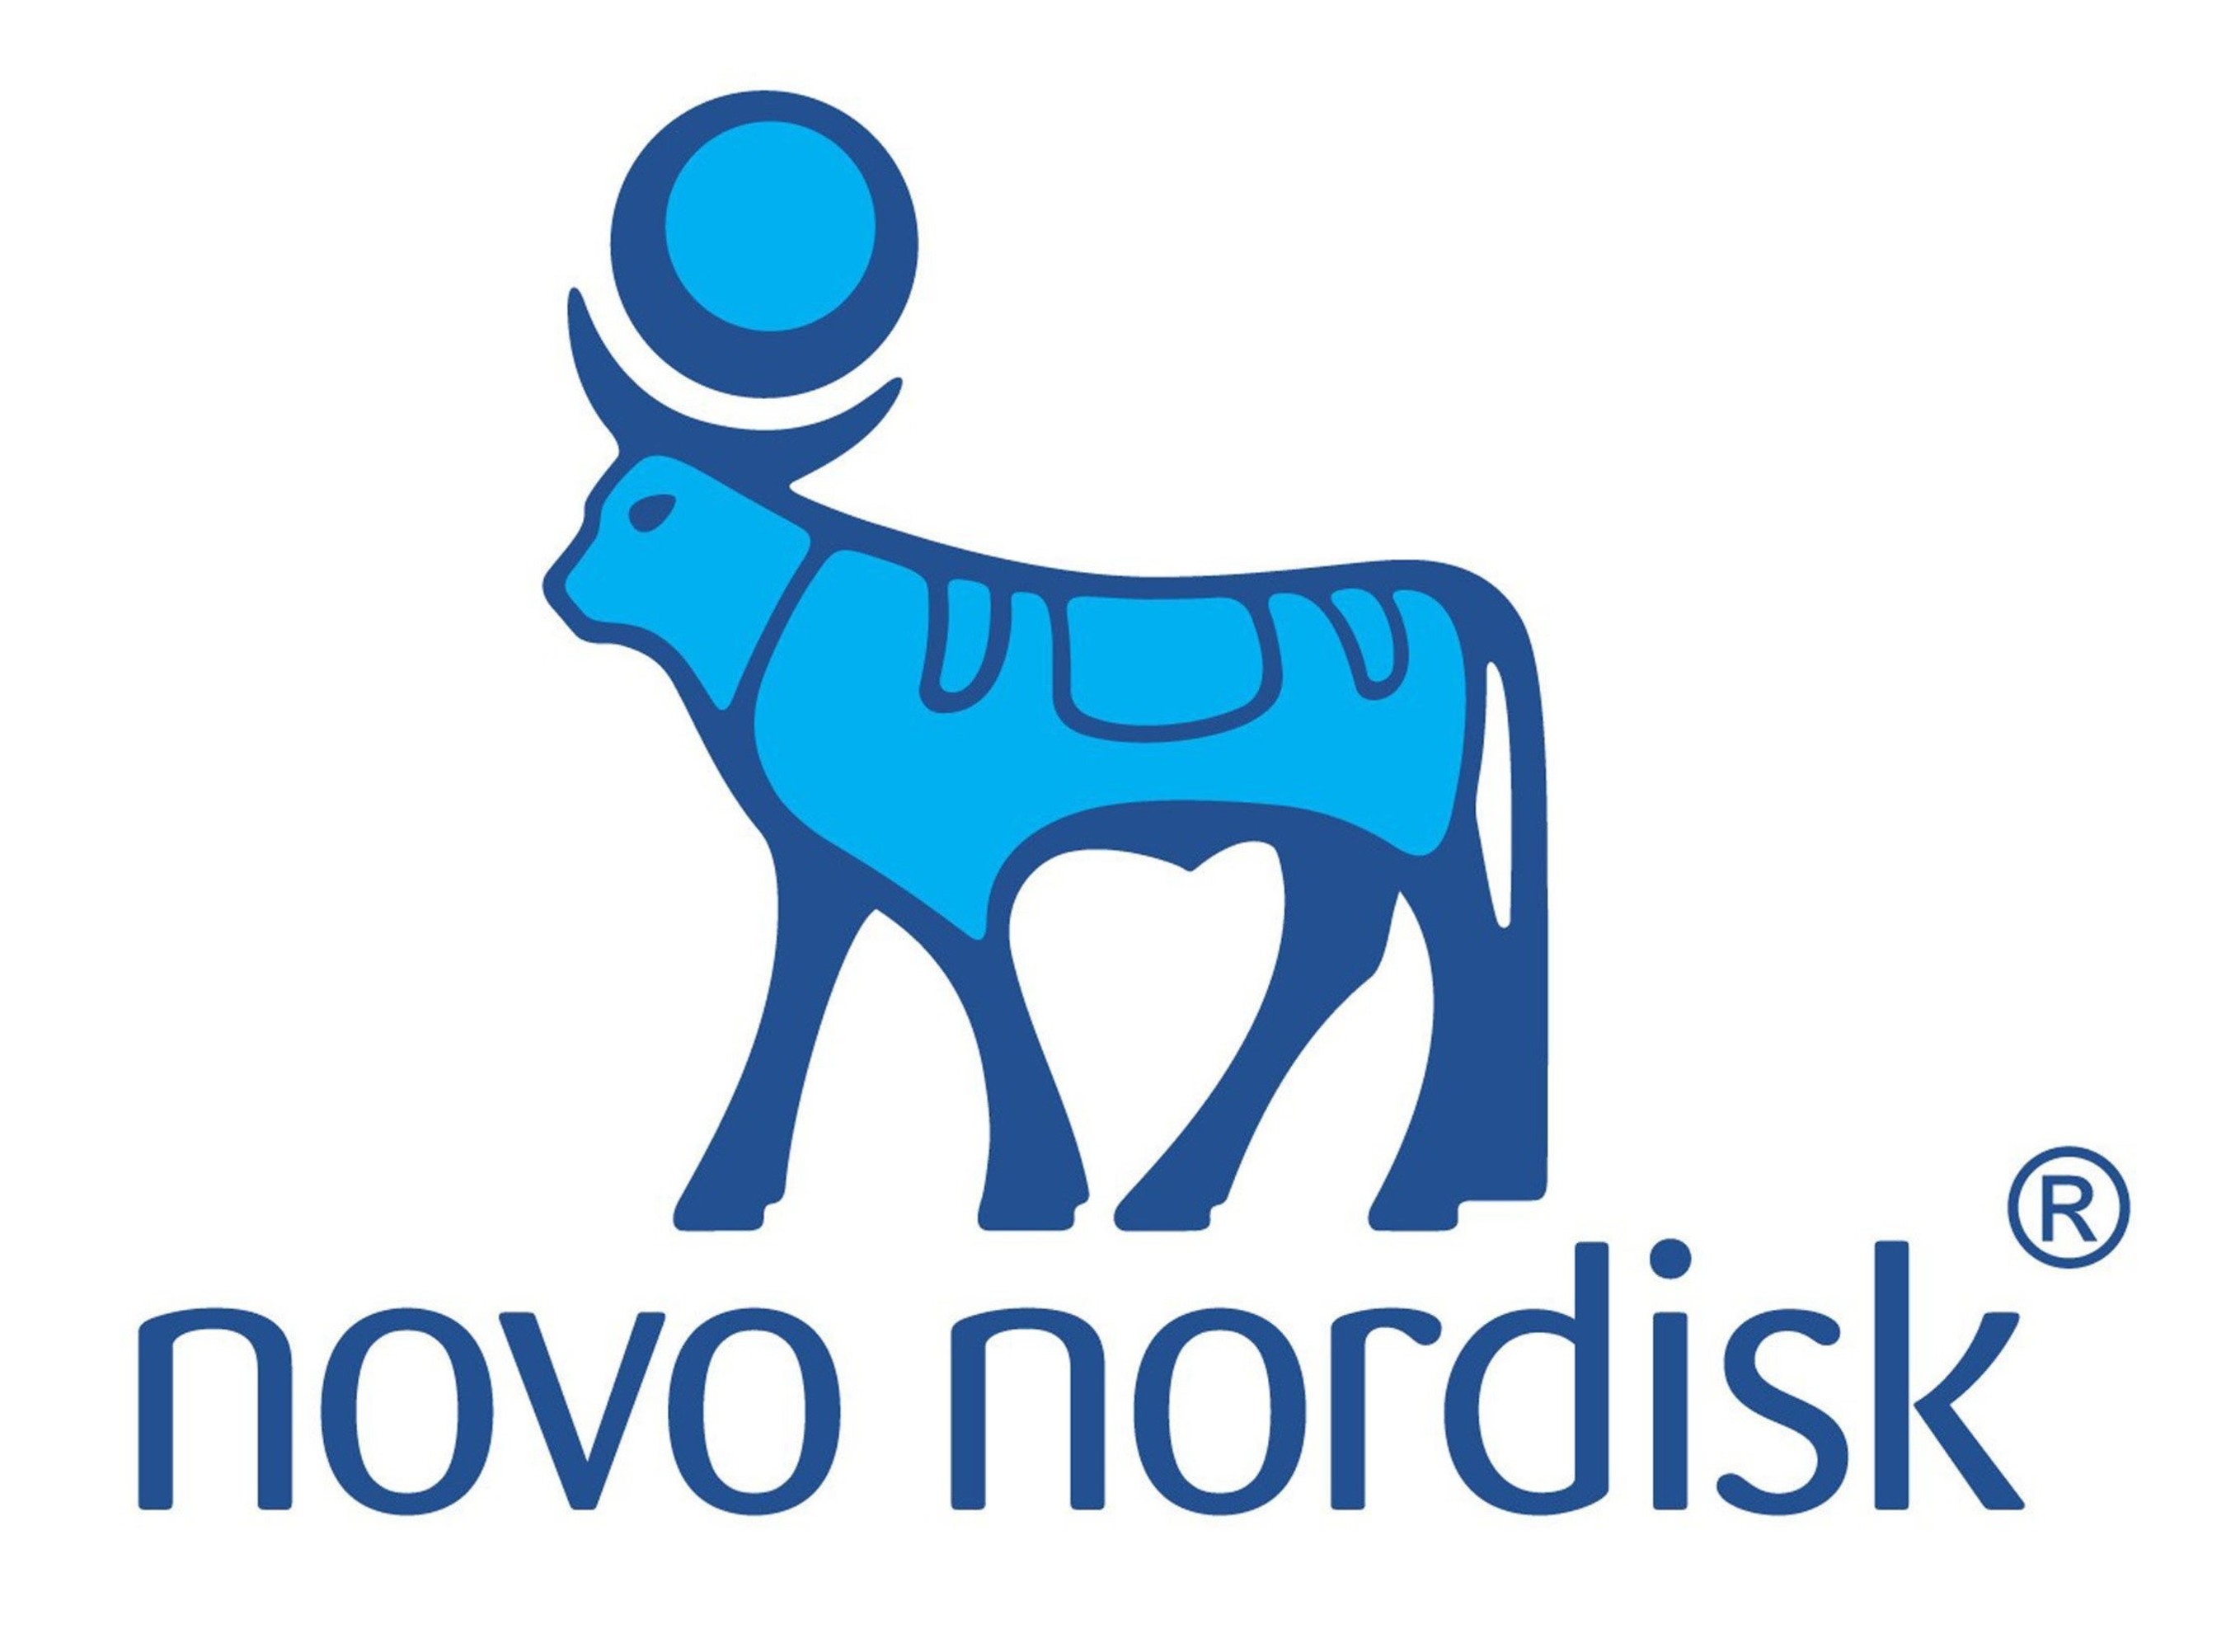 working mother names novo nordisk inc. one of its "100 best companies"